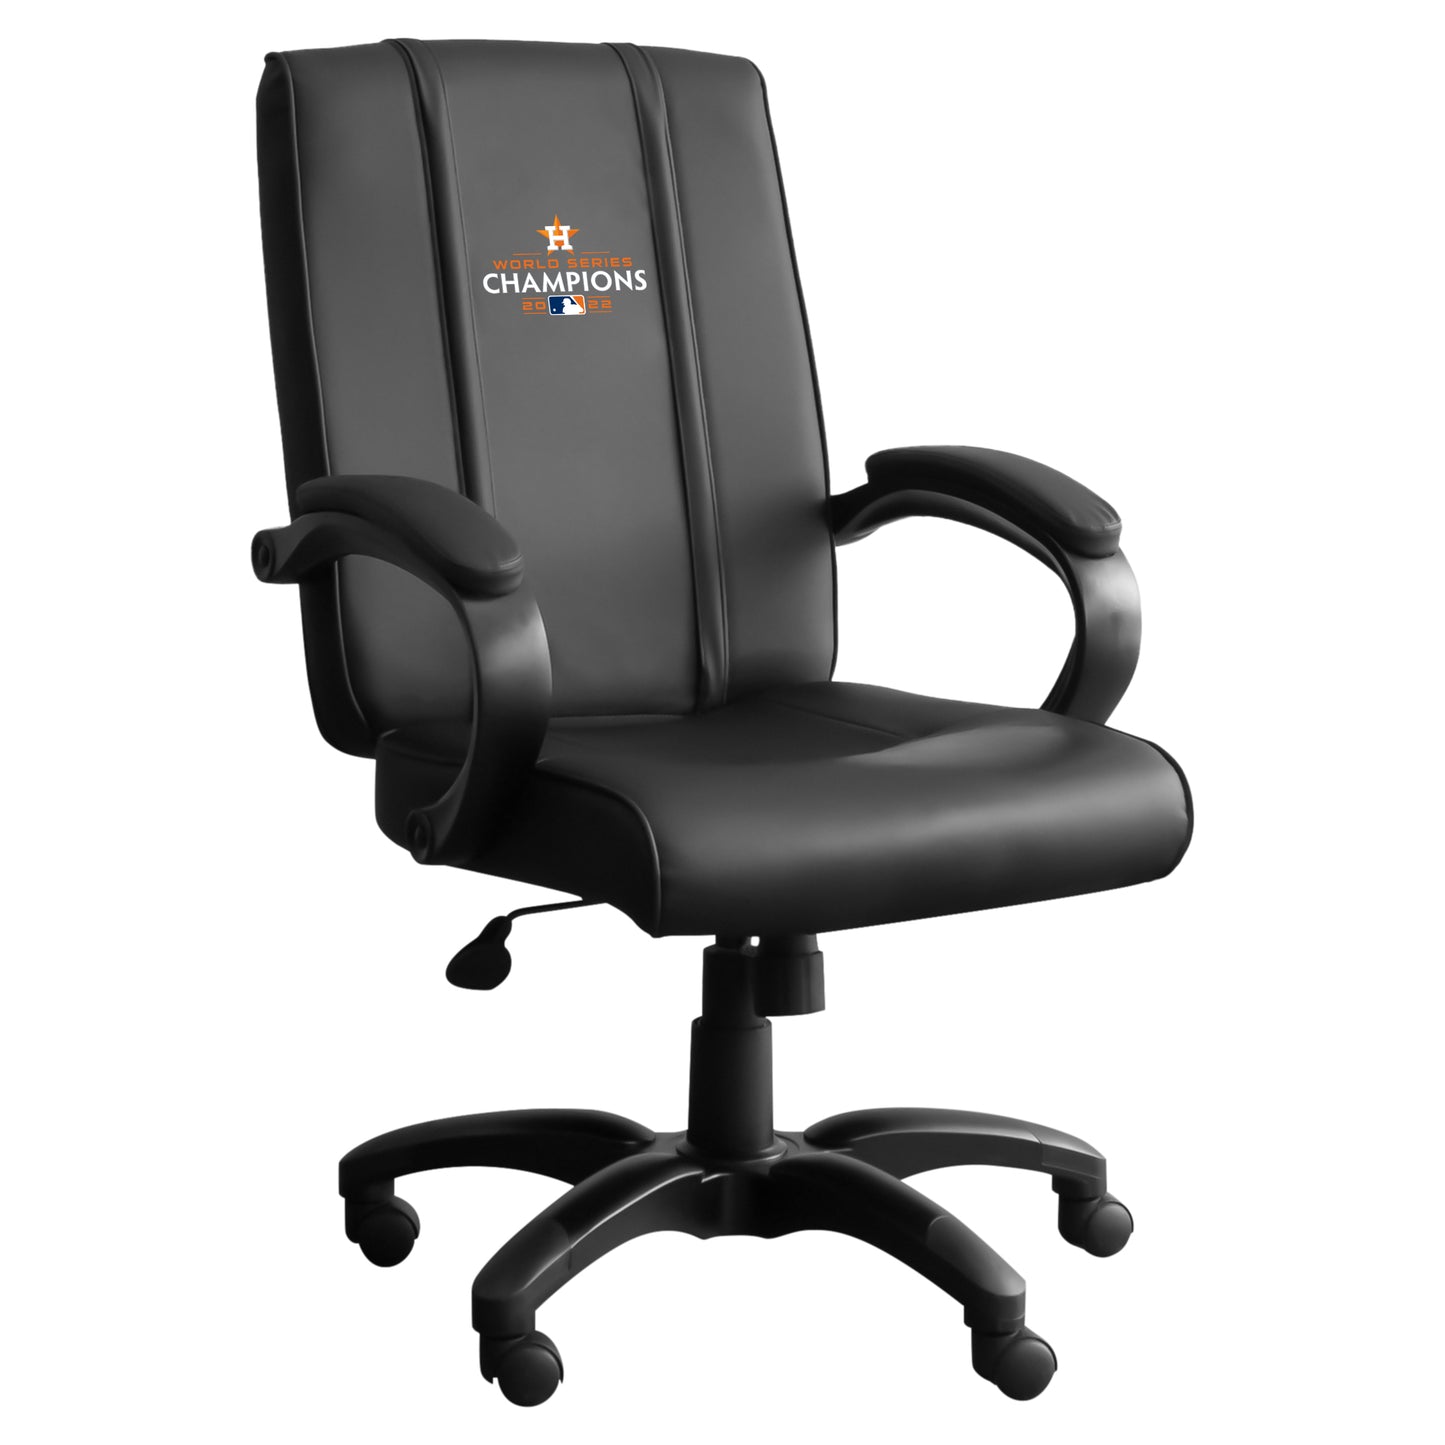 Office Chair 1000 with Houston Astros 2022 Champions